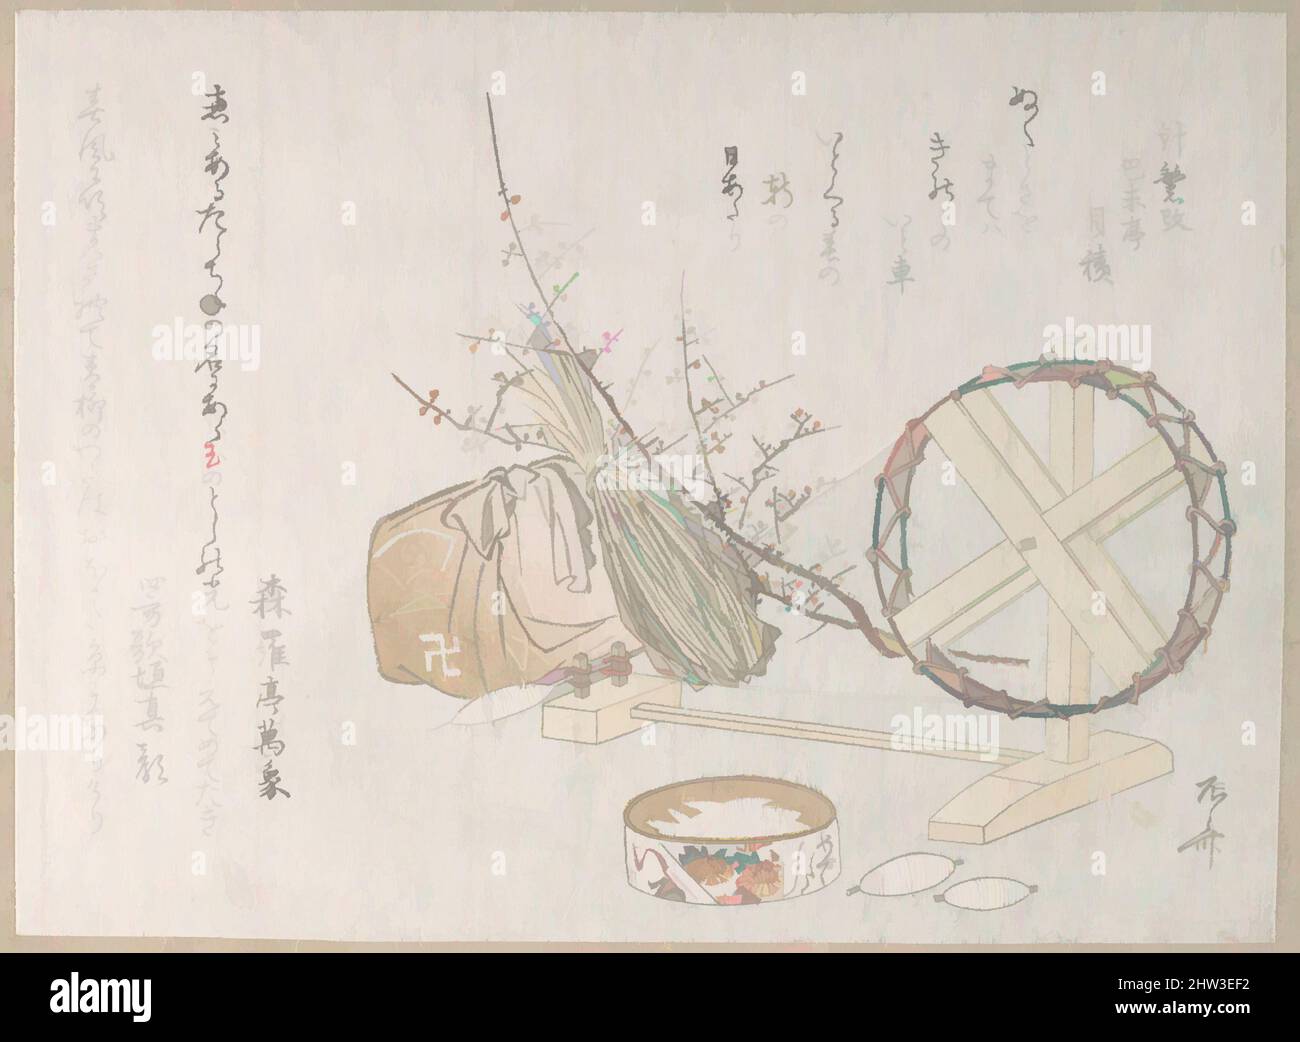 Art inspired by Spinning Wheel and Spools, 19th century, Japan, Part of an album of woodblock prints (surimono); ink and color on paper, 5 5/16 x 7 3/16 in. (13.5 x 18.3 cm), Prints, Ryūryūkyo Shinsai (Japanese, active ca. 1799–1823, Classic works modernized by Artotop with a splash of modernity. Shapes, color and value, eye-catching visual impact on art. Emotions through freedom of artworks in a contemporary way. A timeless message pursuing a wildly creative new direction. Artists turning to the digital medium and creating the Artotop NFT Stock Photo